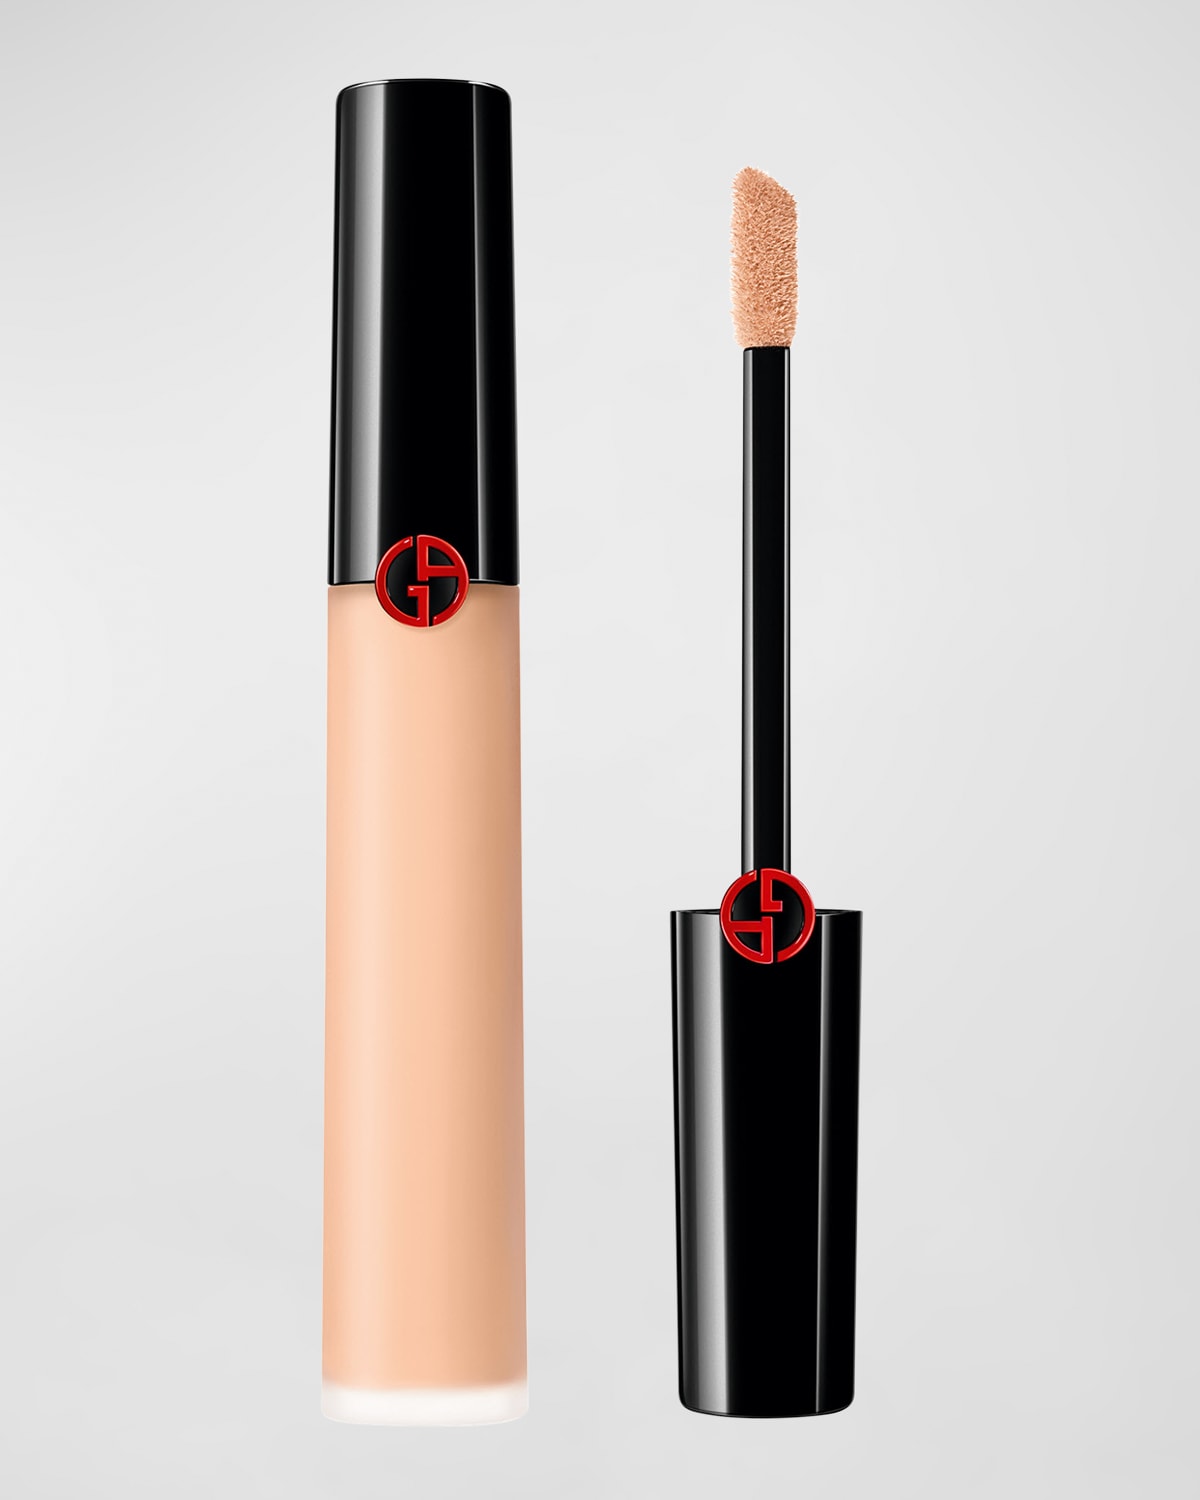 ARMANI beauty Power Fabric Concealer